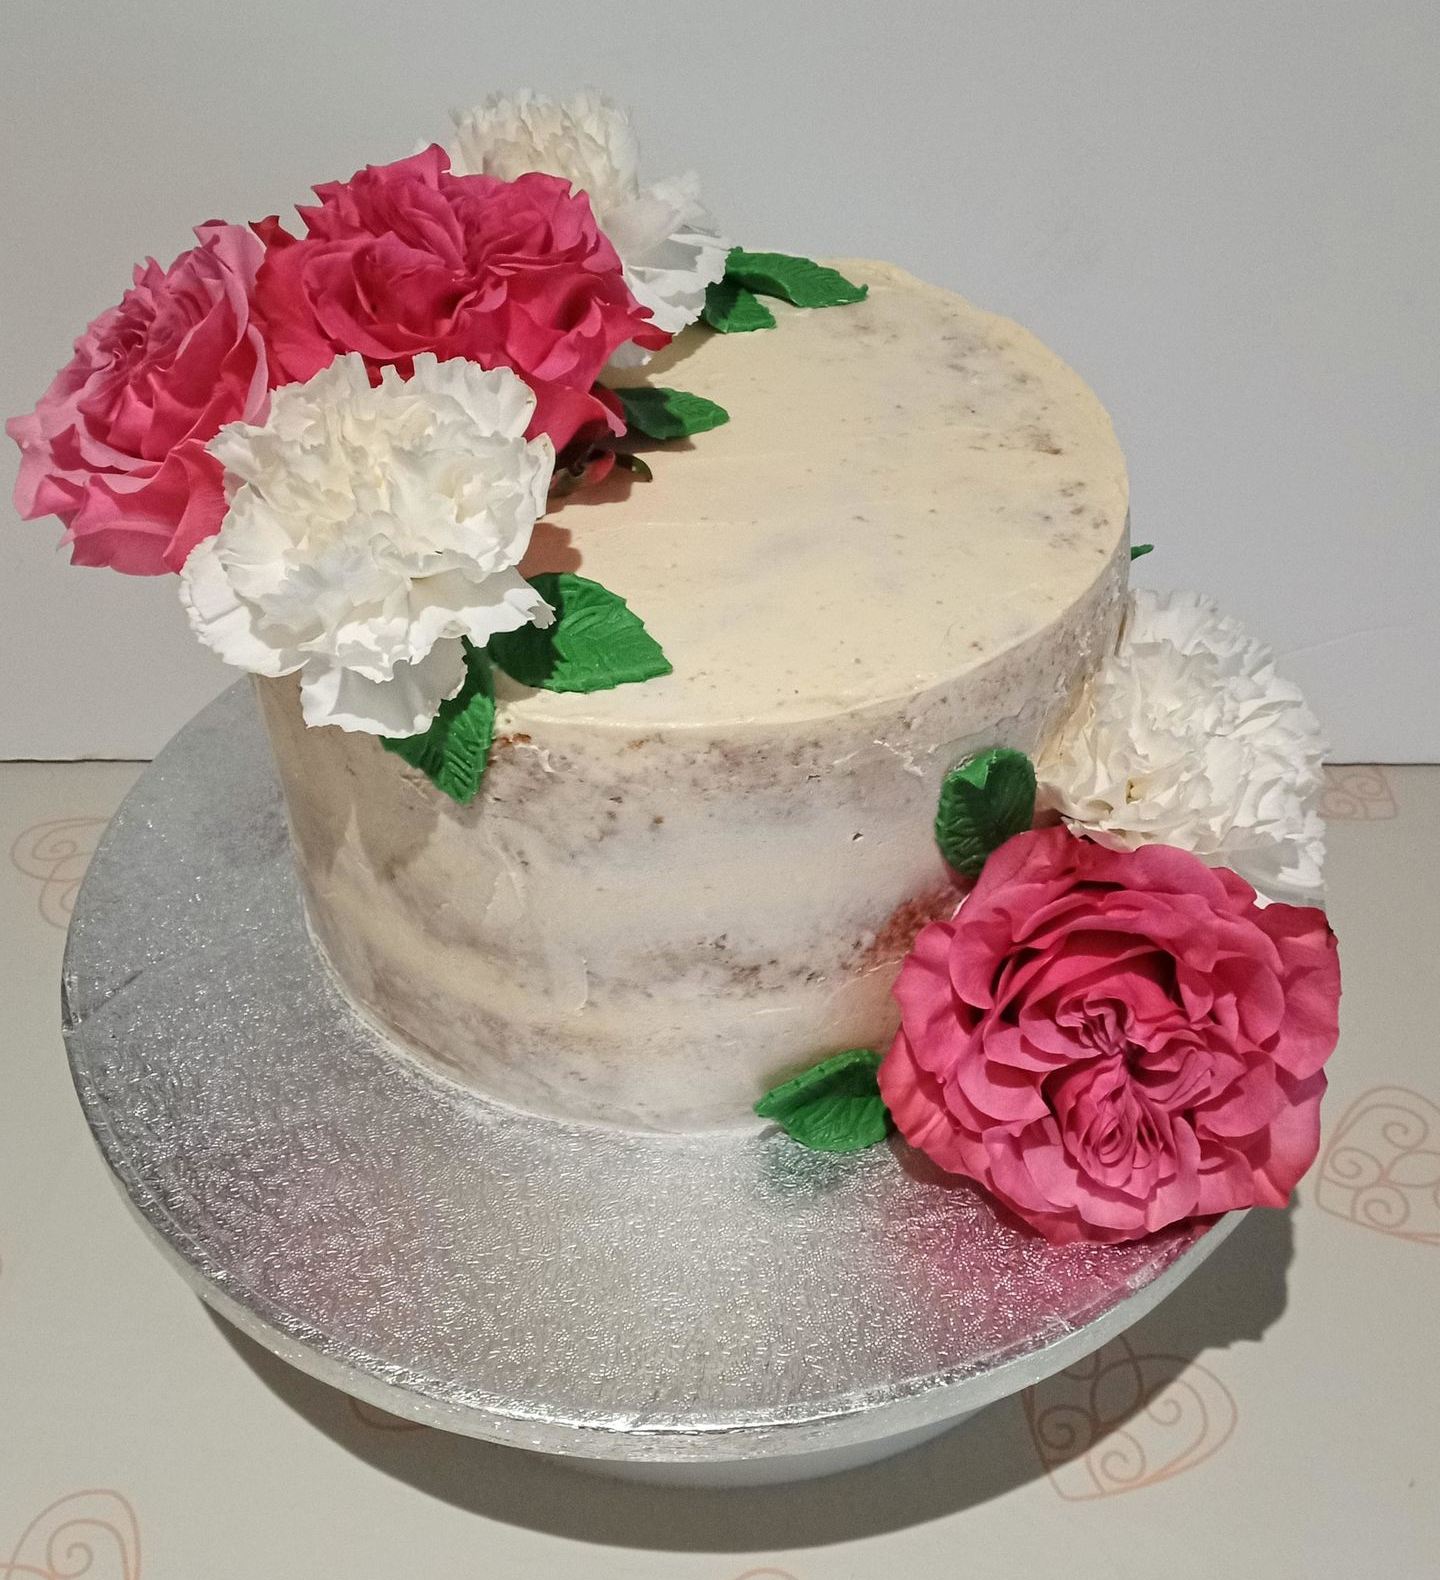 Naked cake effect with fresh flowers